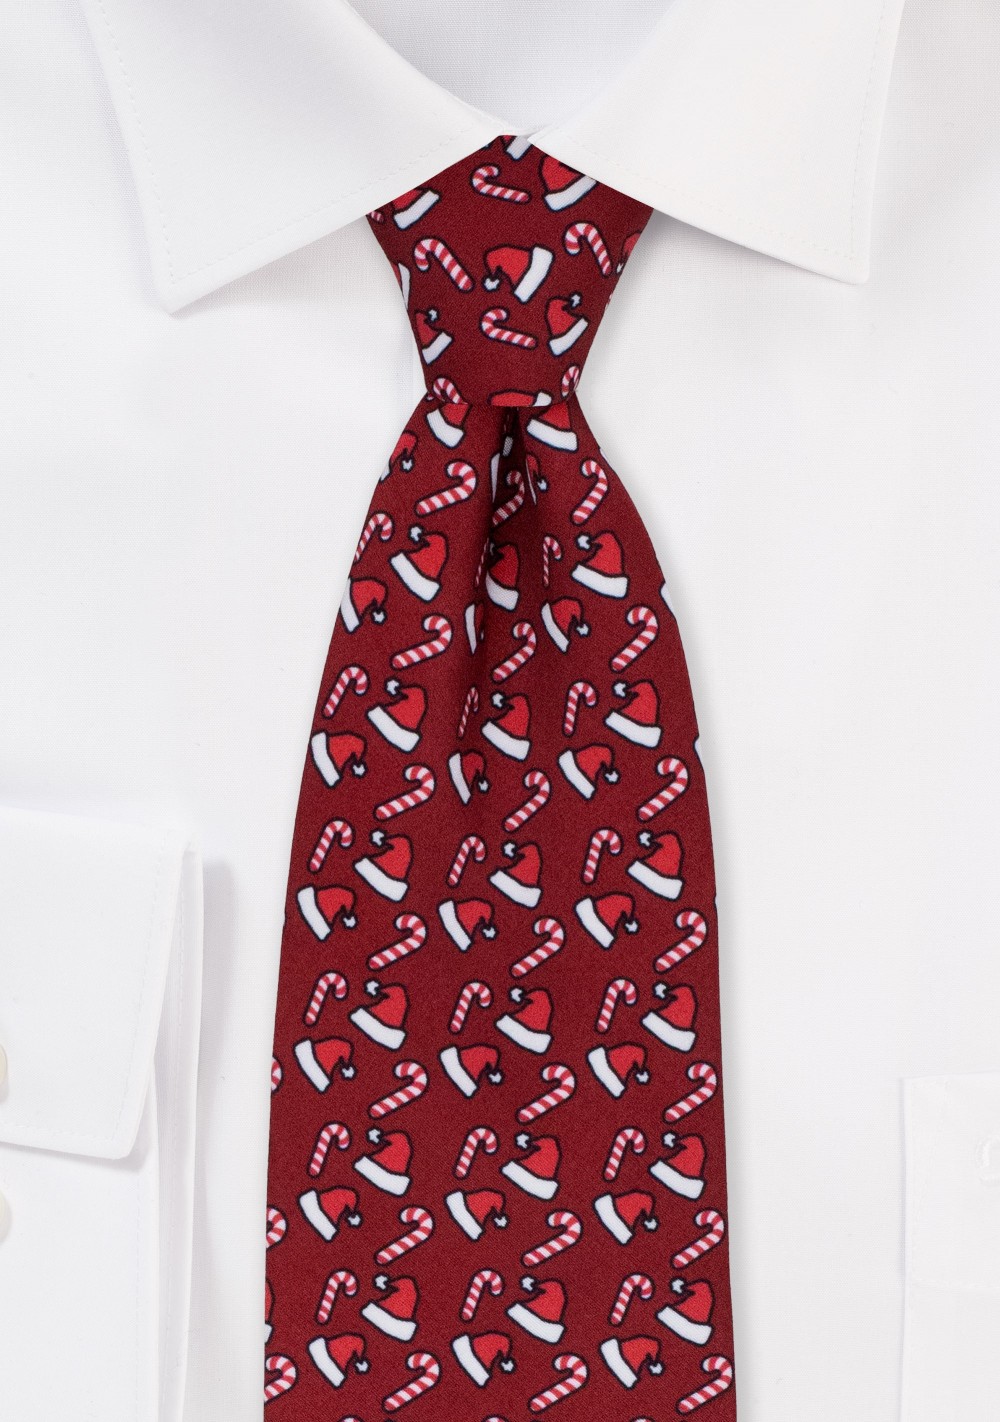 Christmas Print Tie in Cherry Red